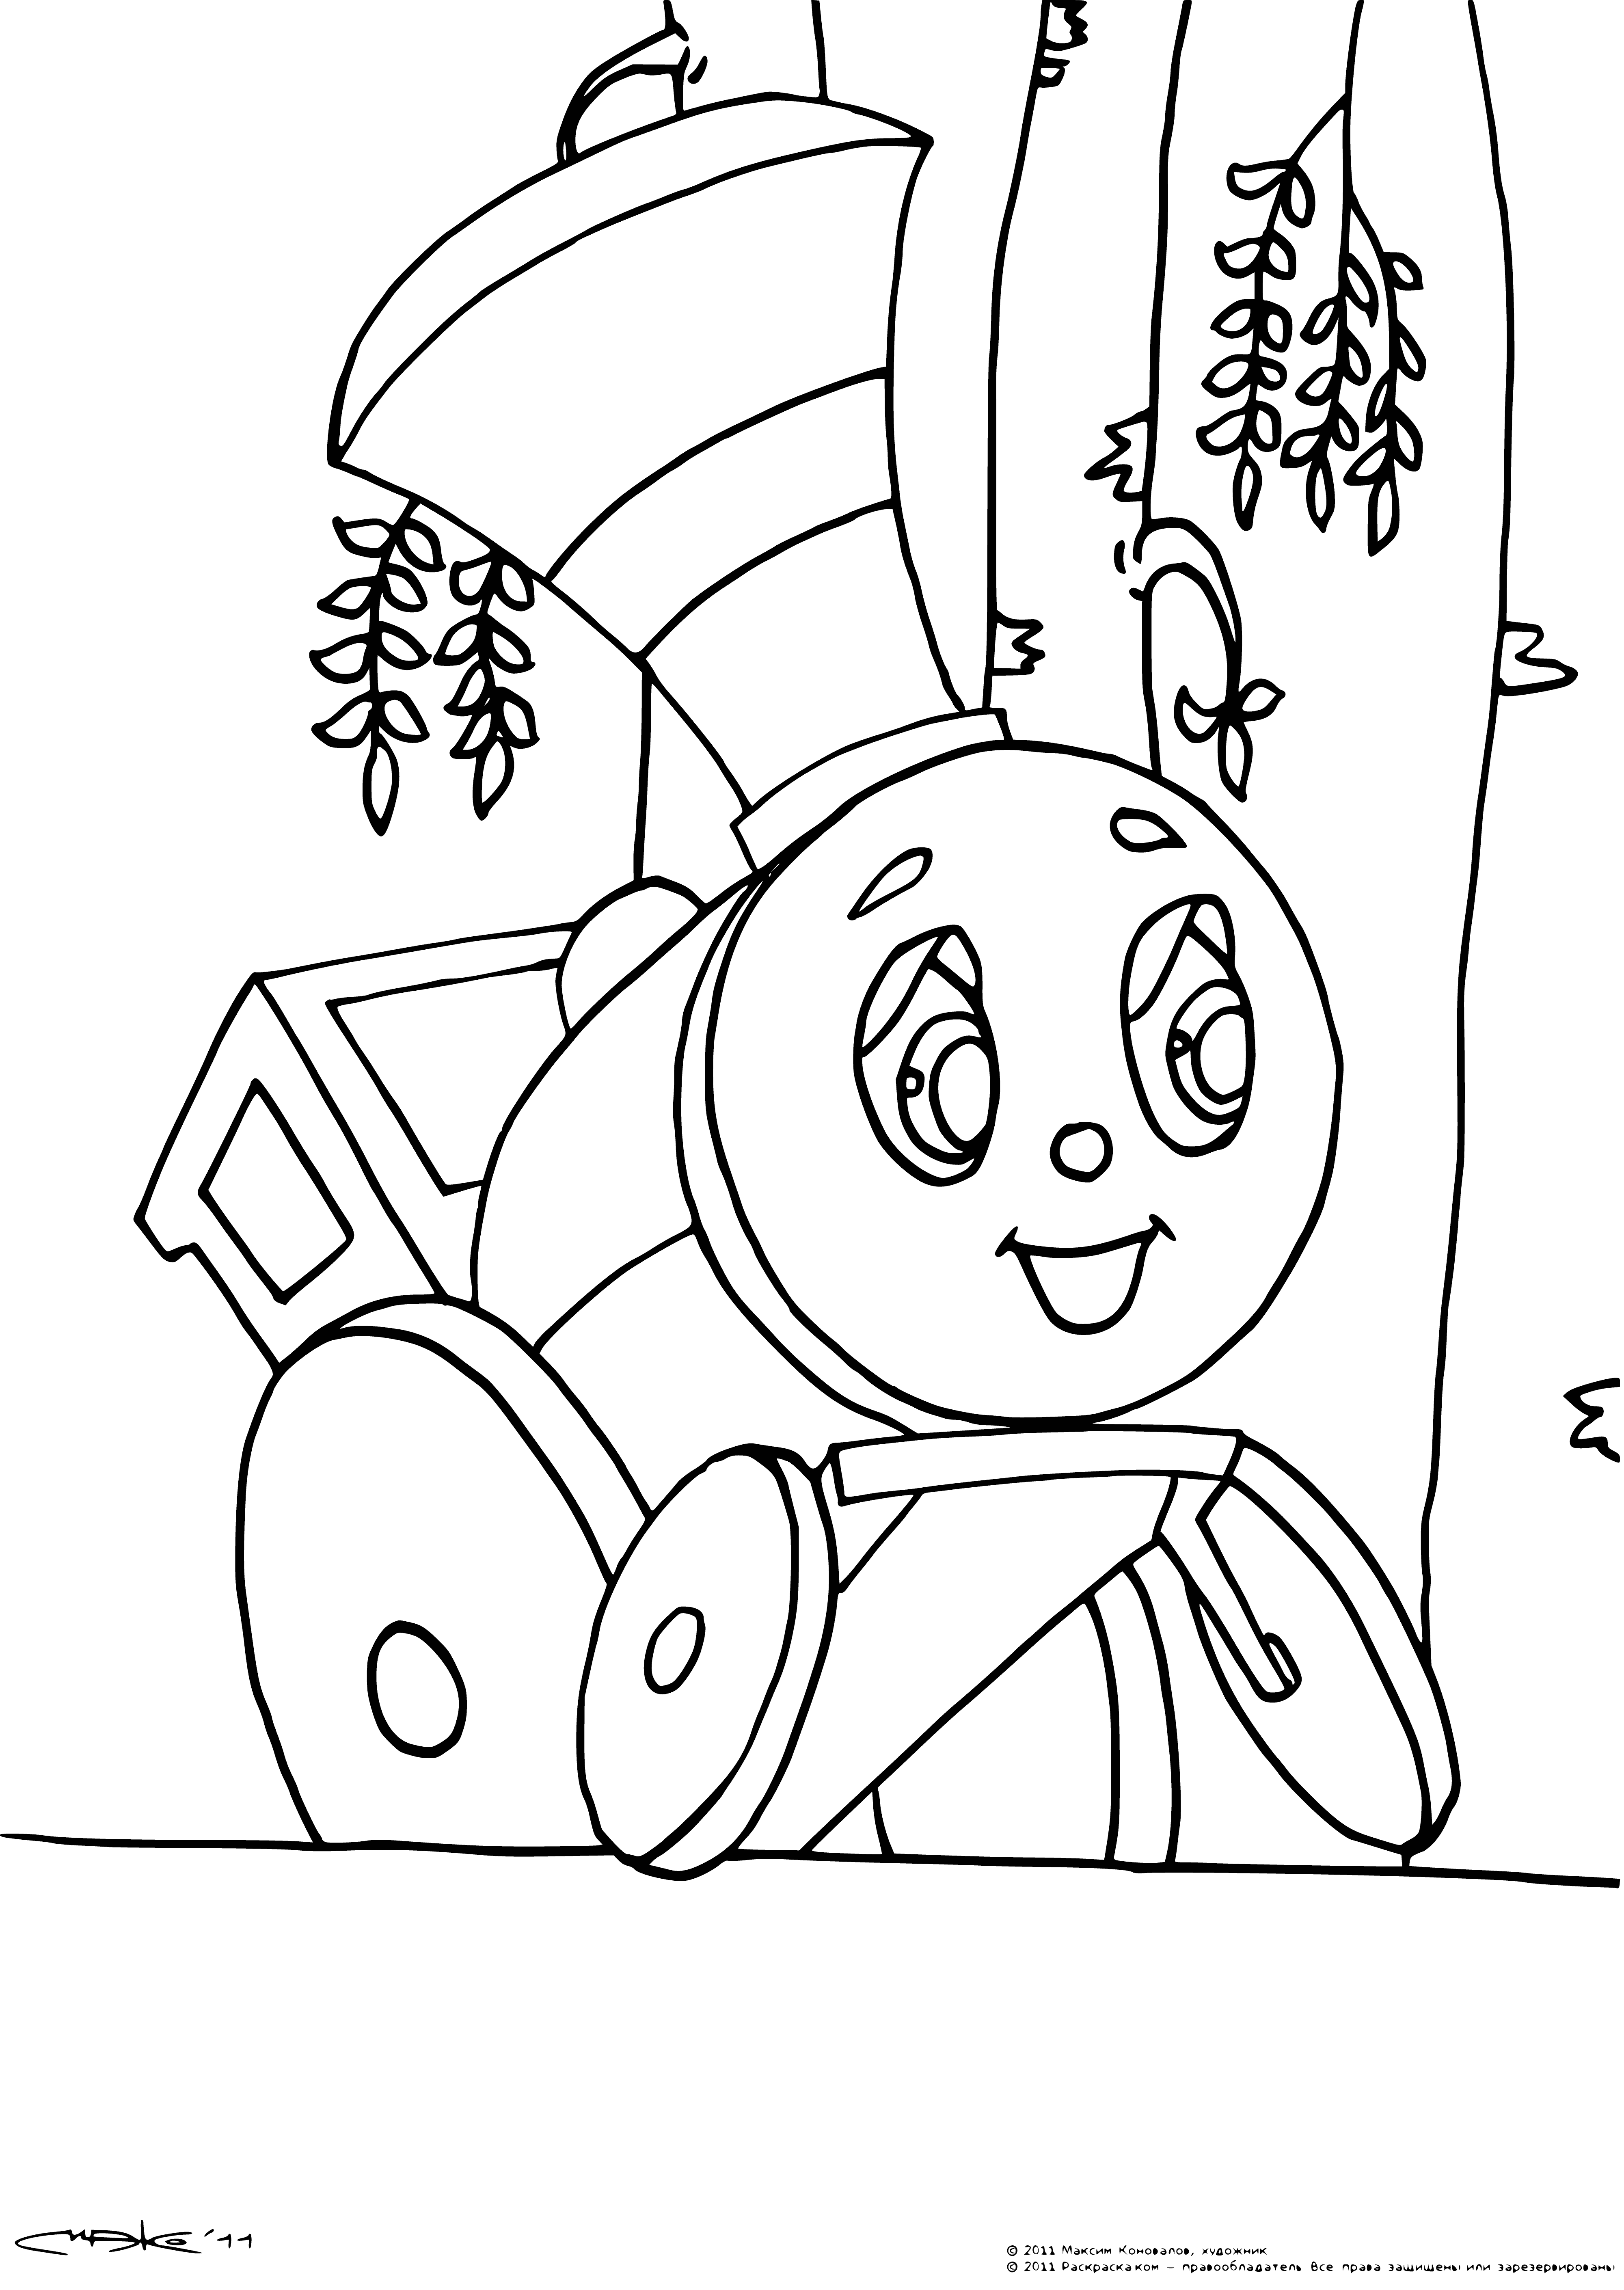 coloring page: Romashkovo locomotive rests on a track in grass. Old and rusty.